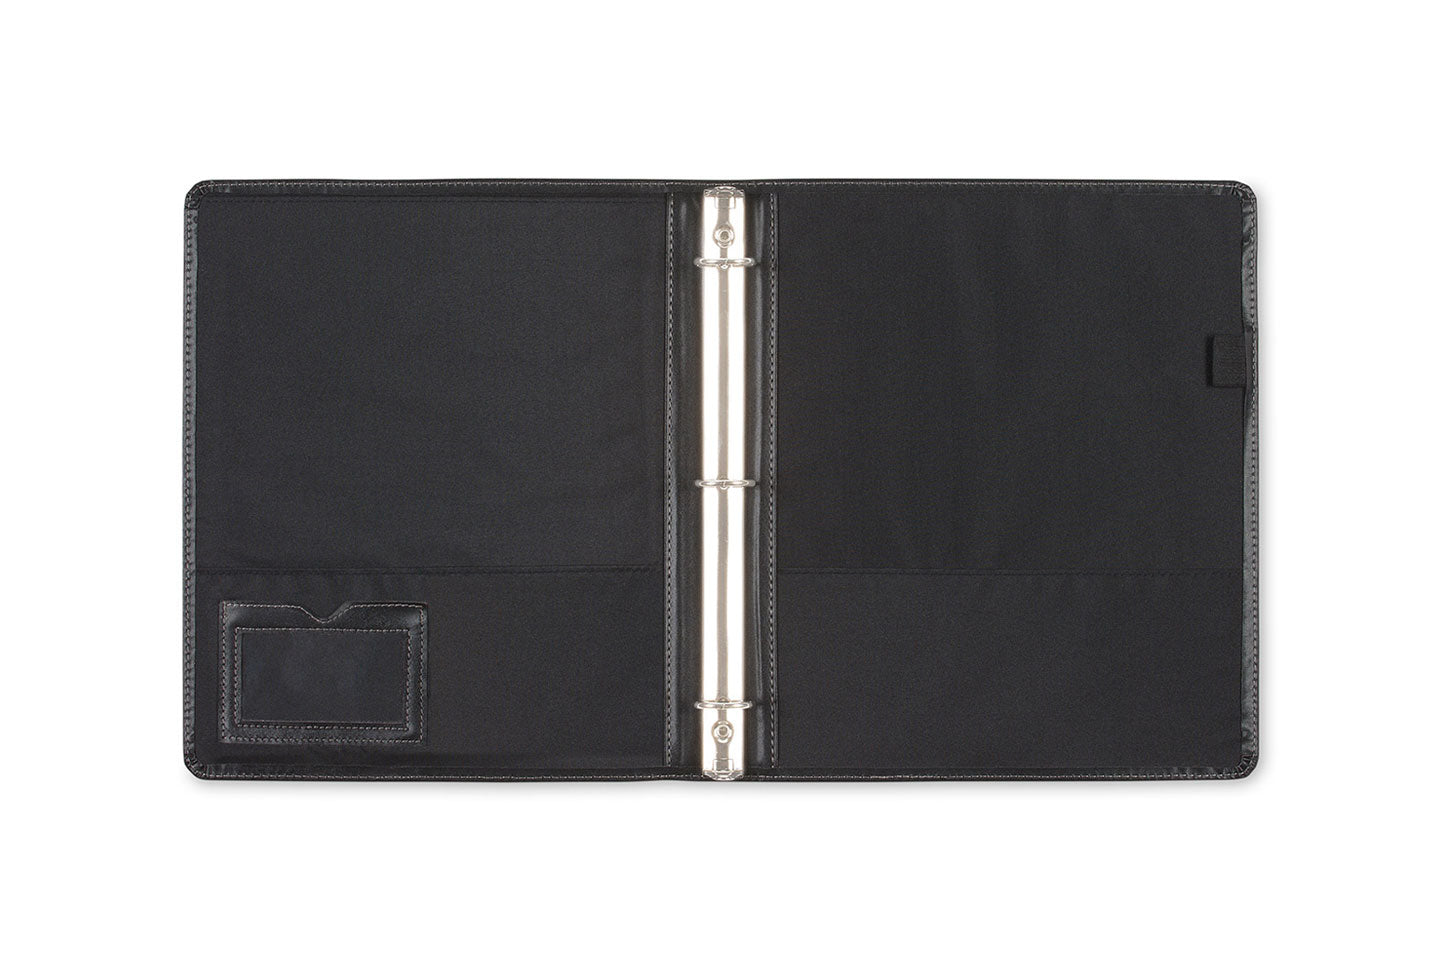 1 inch faux leather binder from blue sky featuring a pen loop holder, 1 inch binding, business card holder, and ample space for storing documents